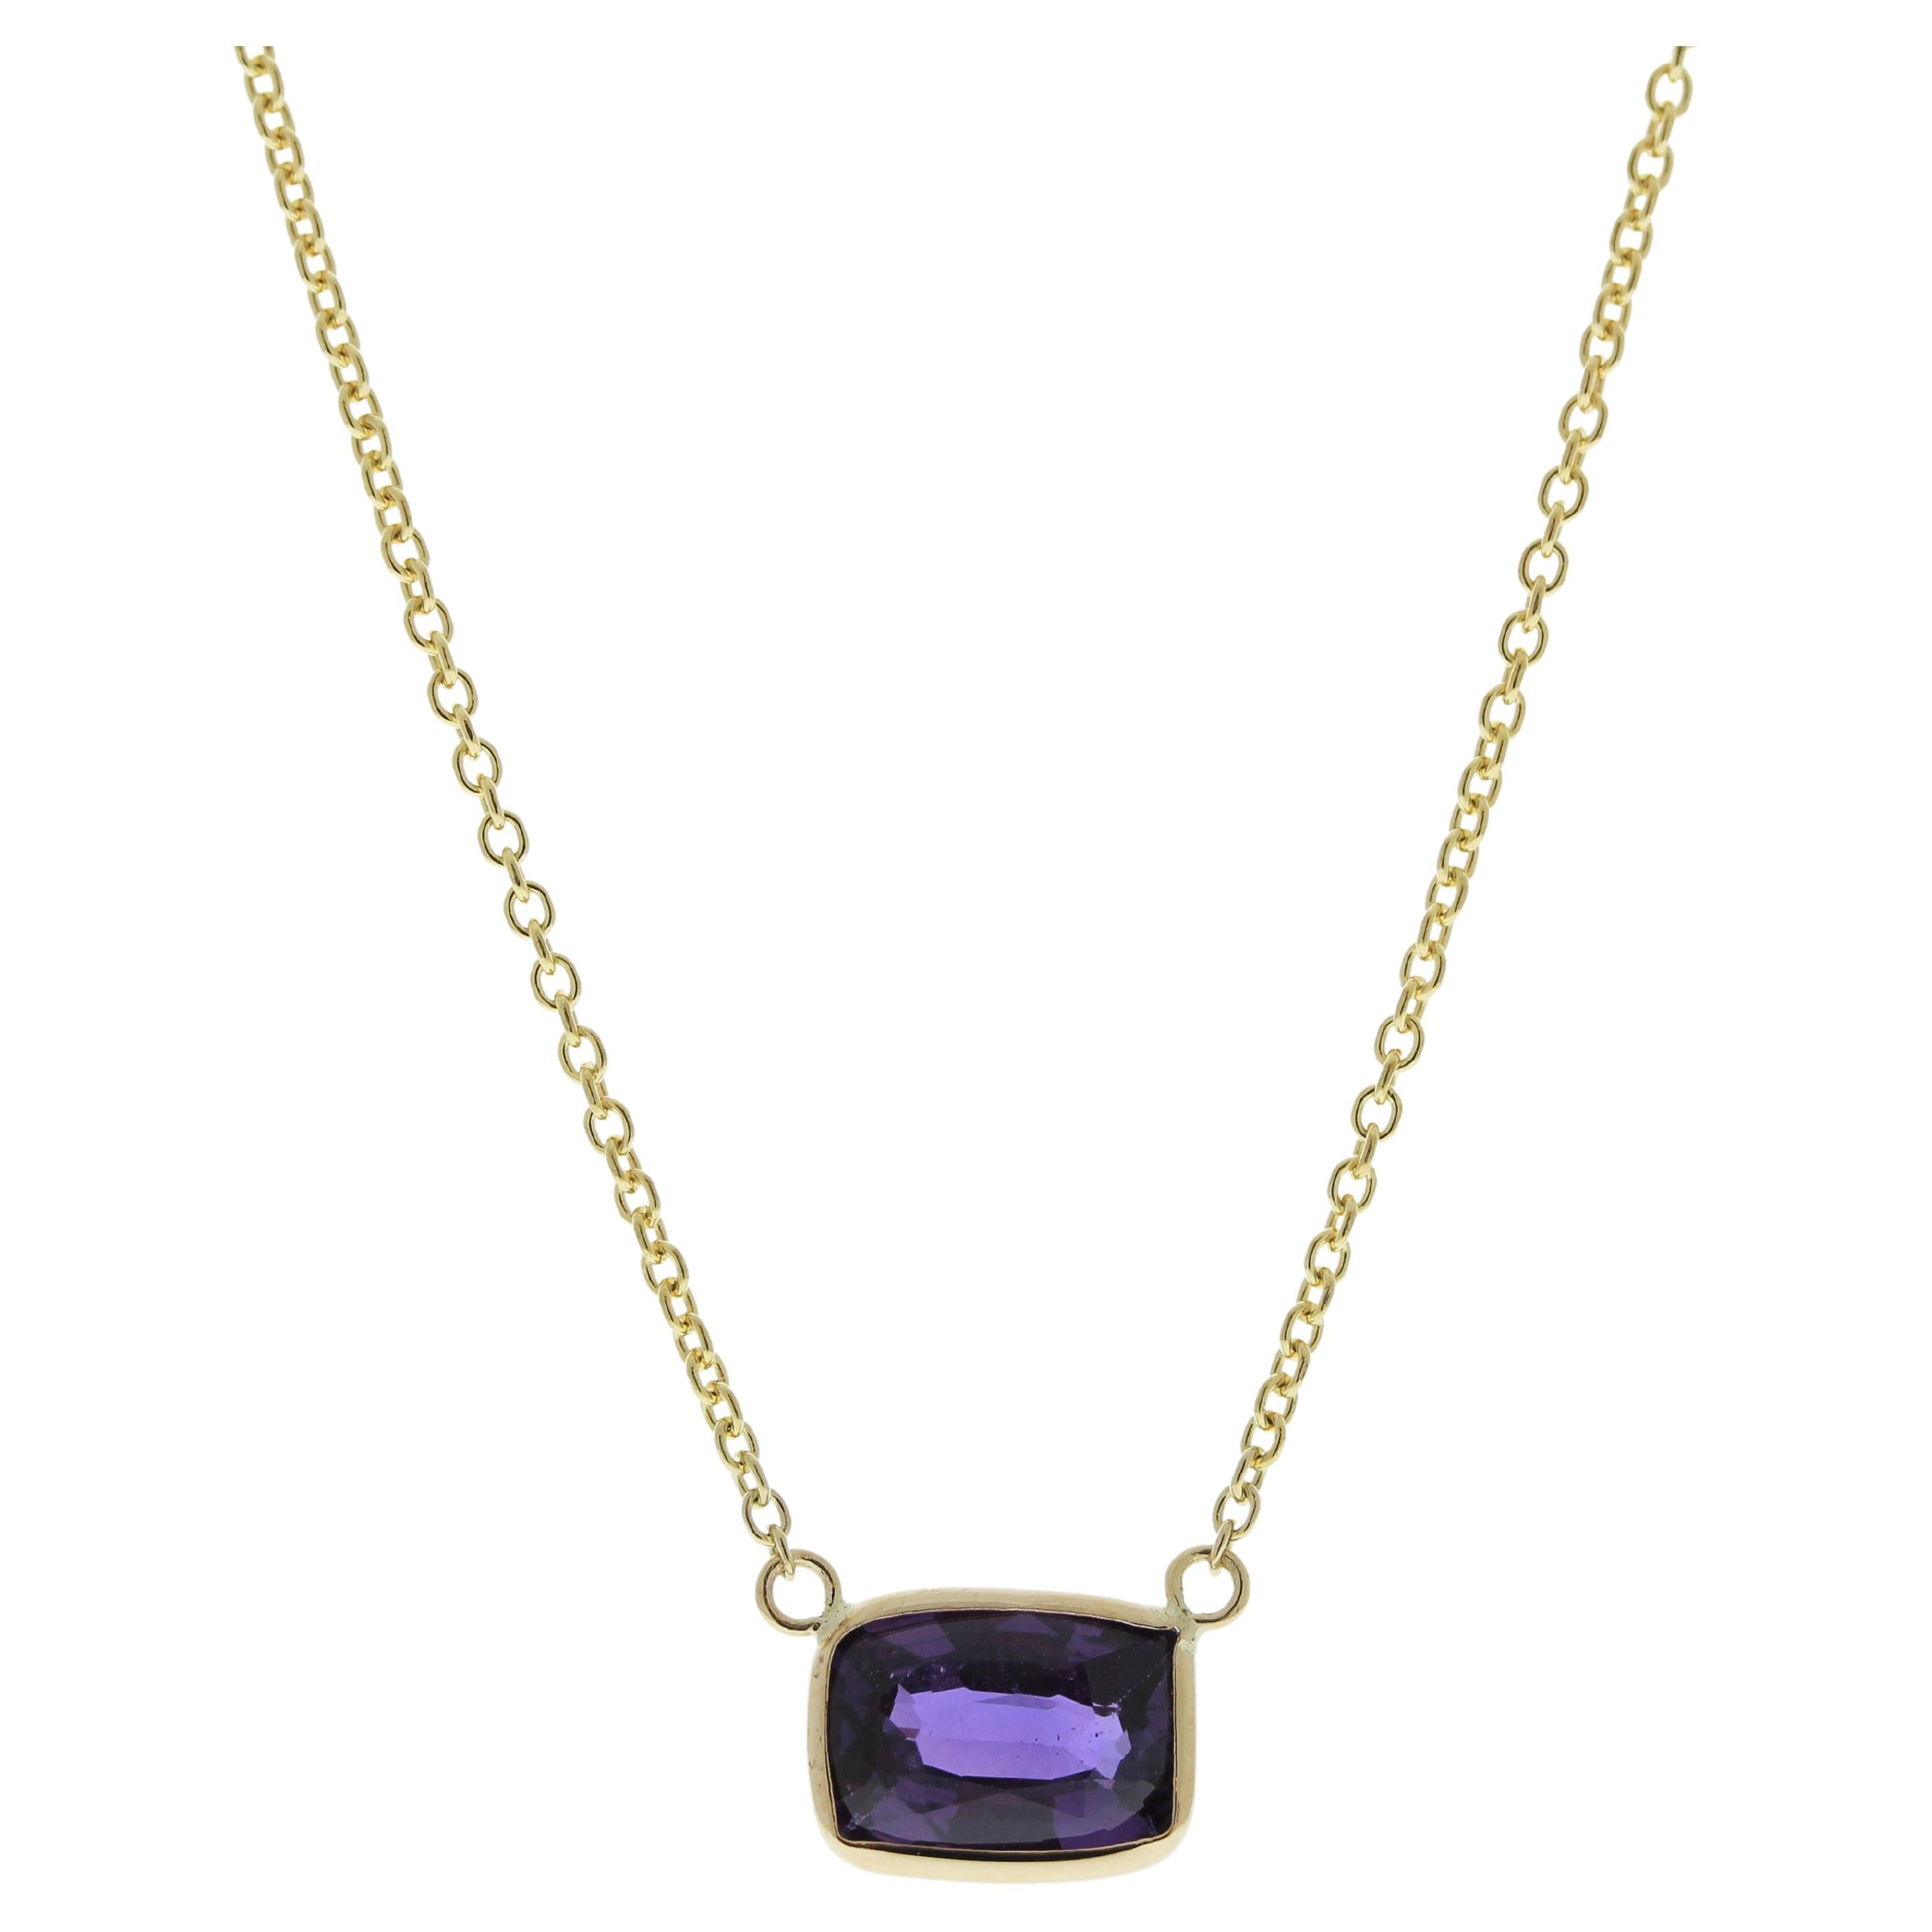 1.97 Carat Cushion Sapphire Purple Fashion Necklaces In 14k Yellow Gold